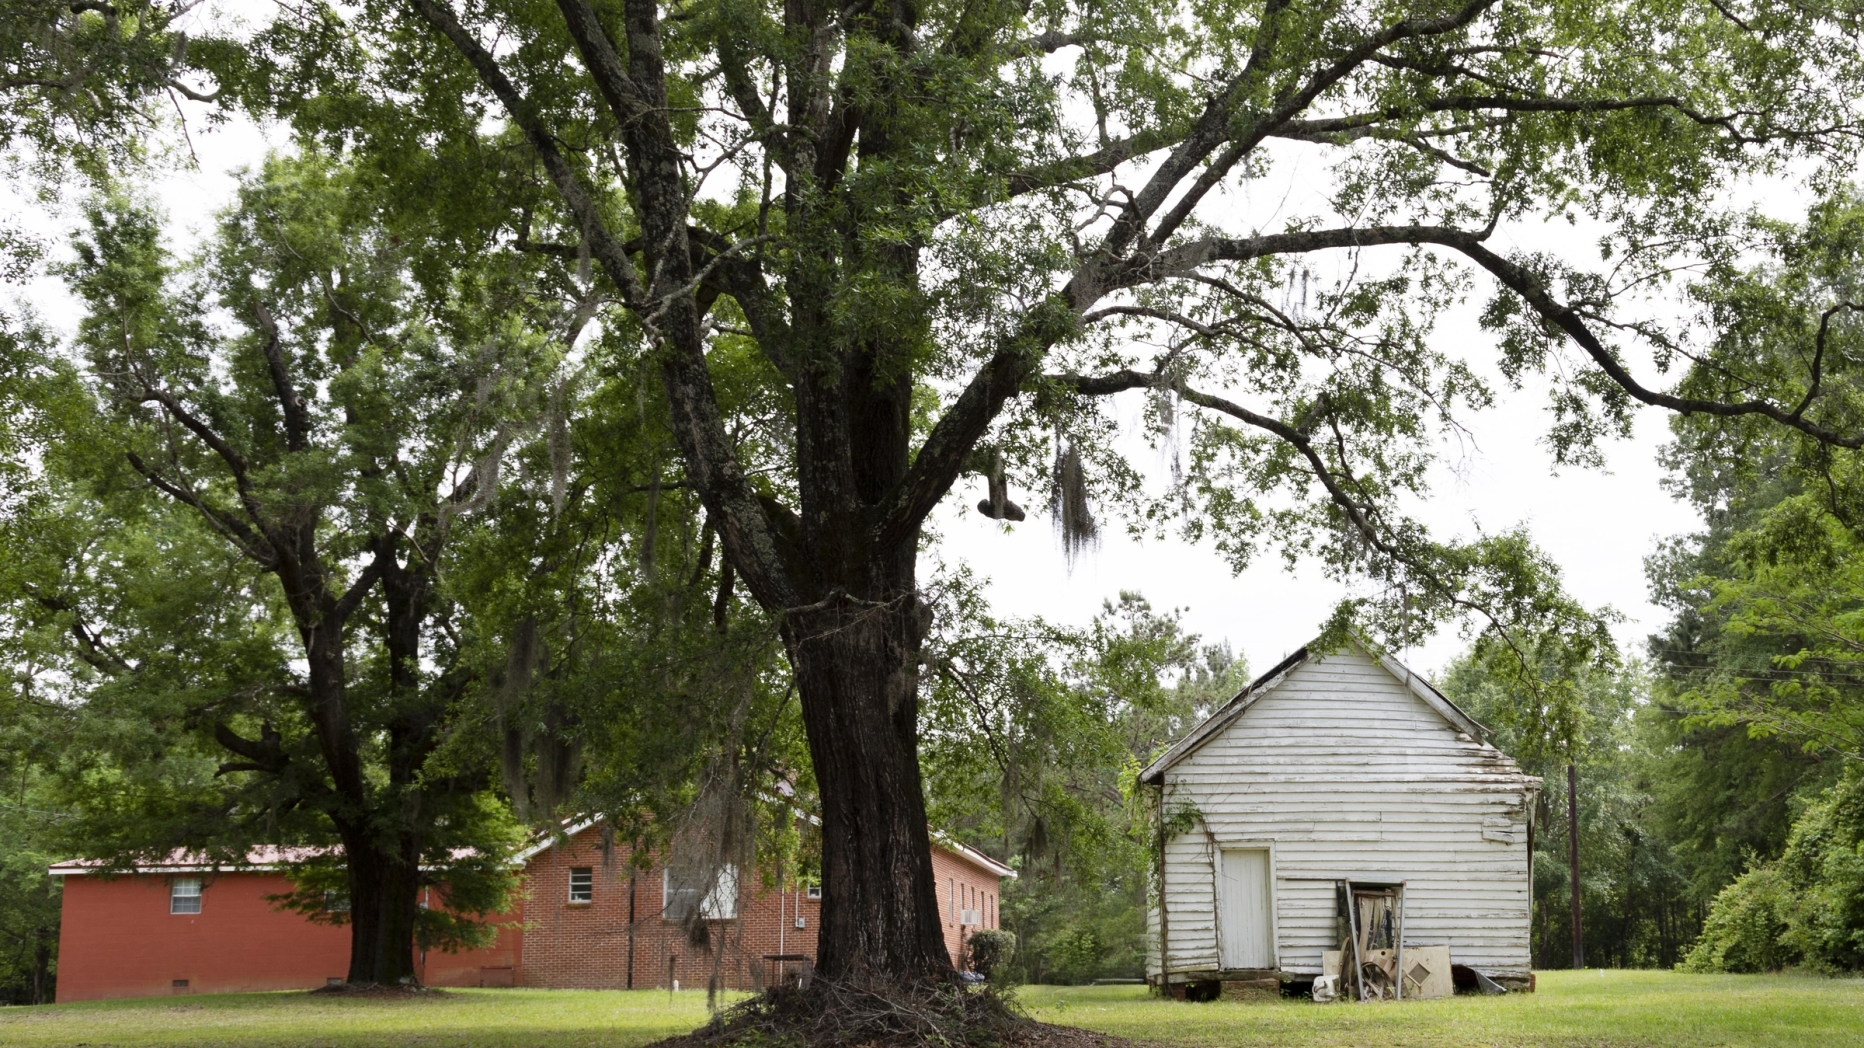 brick church, large tree and white wooden school house